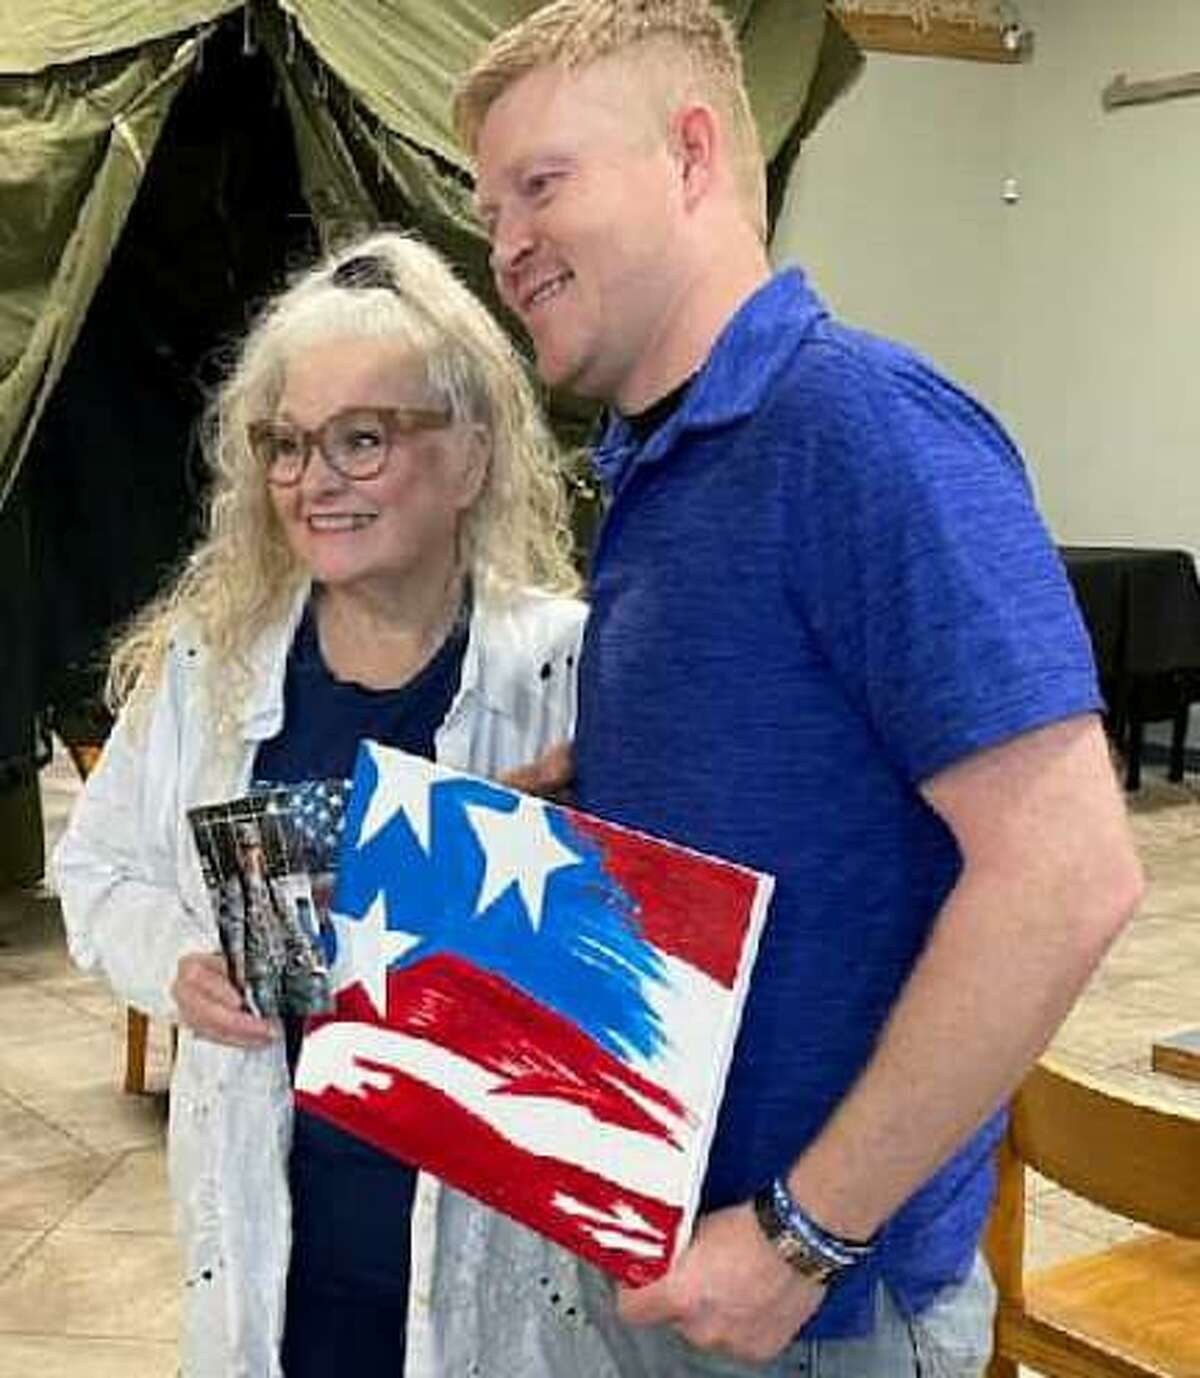 Dody Denman, left, started painting later in life and recently presented a painting of an American flag to Honor Cafe in Conroe. She’s pictured with Honor Cafe manager Chris Grouse.